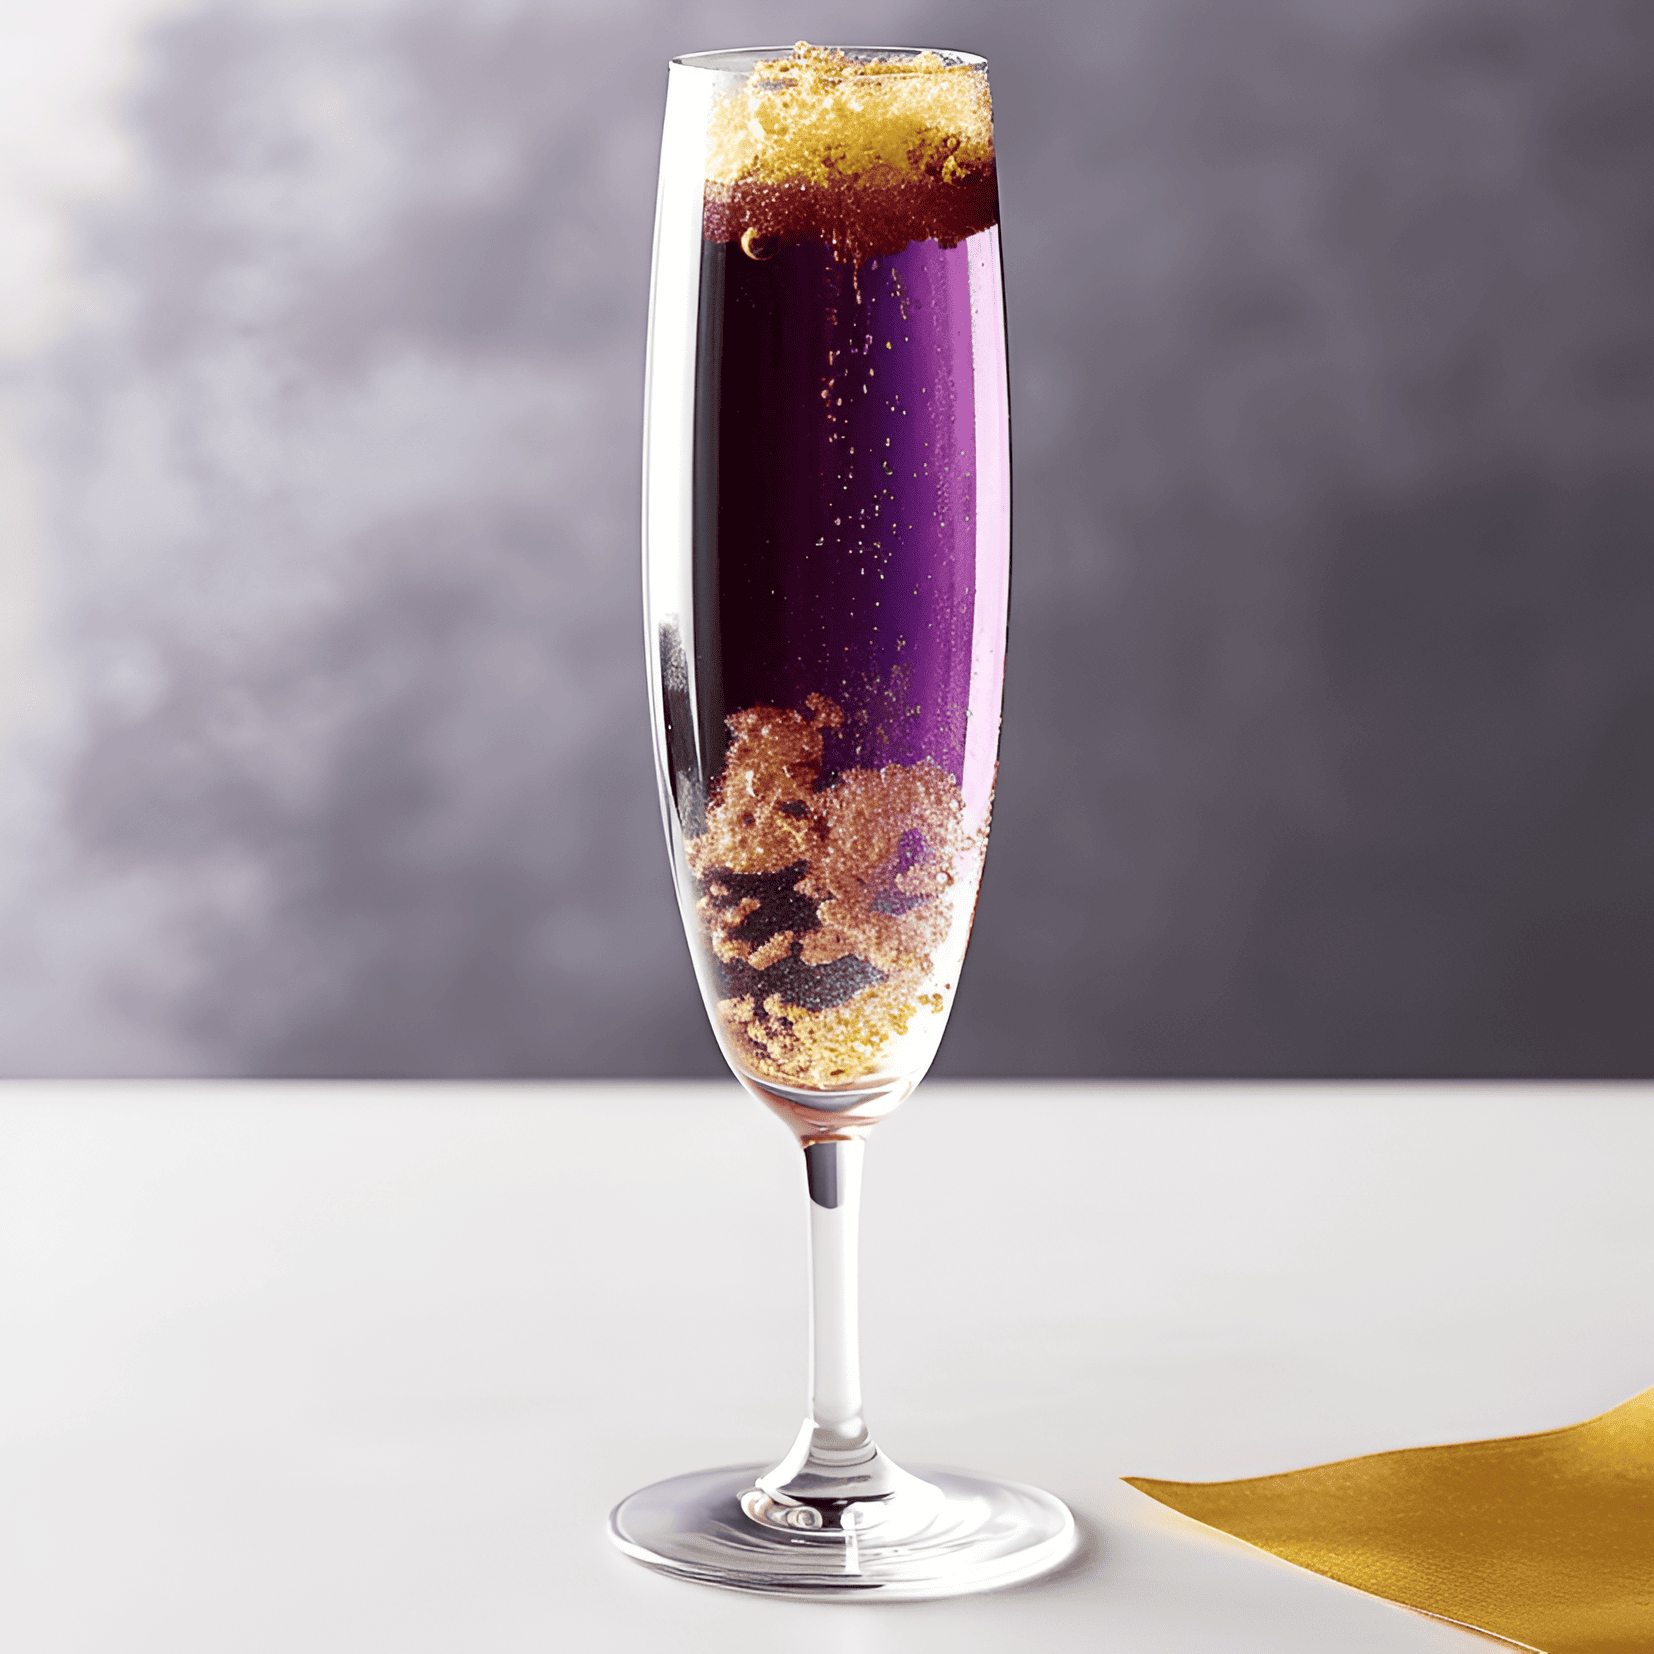 Cassis Cocktail Recipe - The Cassis cocktail is a delightful combination of sweet, fruity, and slightly tart flavors. The blackcurrant liqueur adds a rich sweetness, while the sparkling wine brings a refreshing effervescence and light acidity.